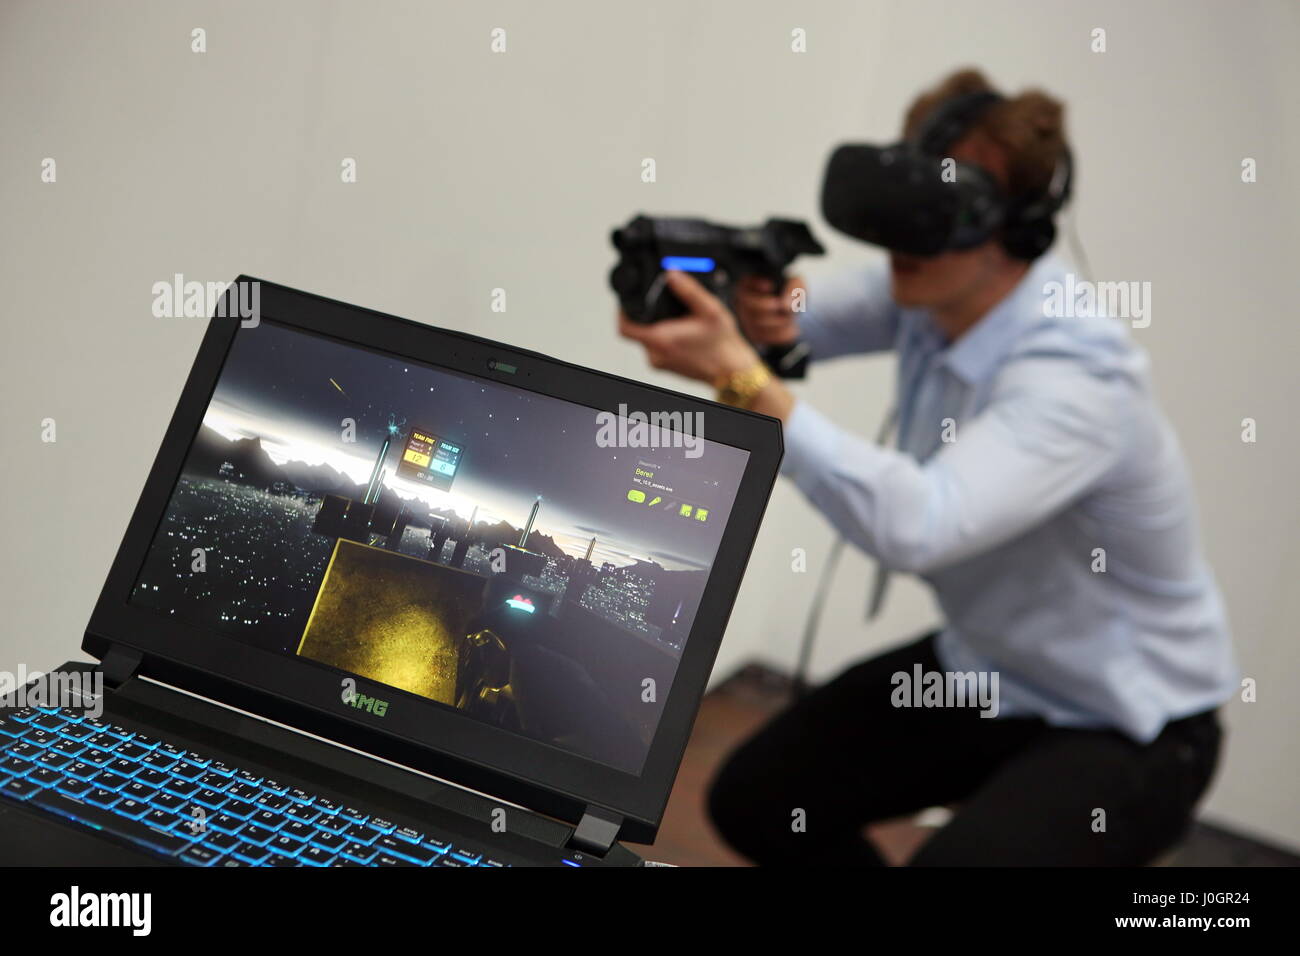 Hanover, Germany. 21th March, 2017. Virtual Reality application - webblog 'VR-Nerds' demonstrates Virtual-Reality-Shooter-Game 'Tower Tag' (with Teamplay-Mode/PvP/coop), visitors can test it. CeBIT 2017, ICT trade fair, lead theme 'd!conomy - no limits'. Photocredit: Christian Lademann Stock Photo